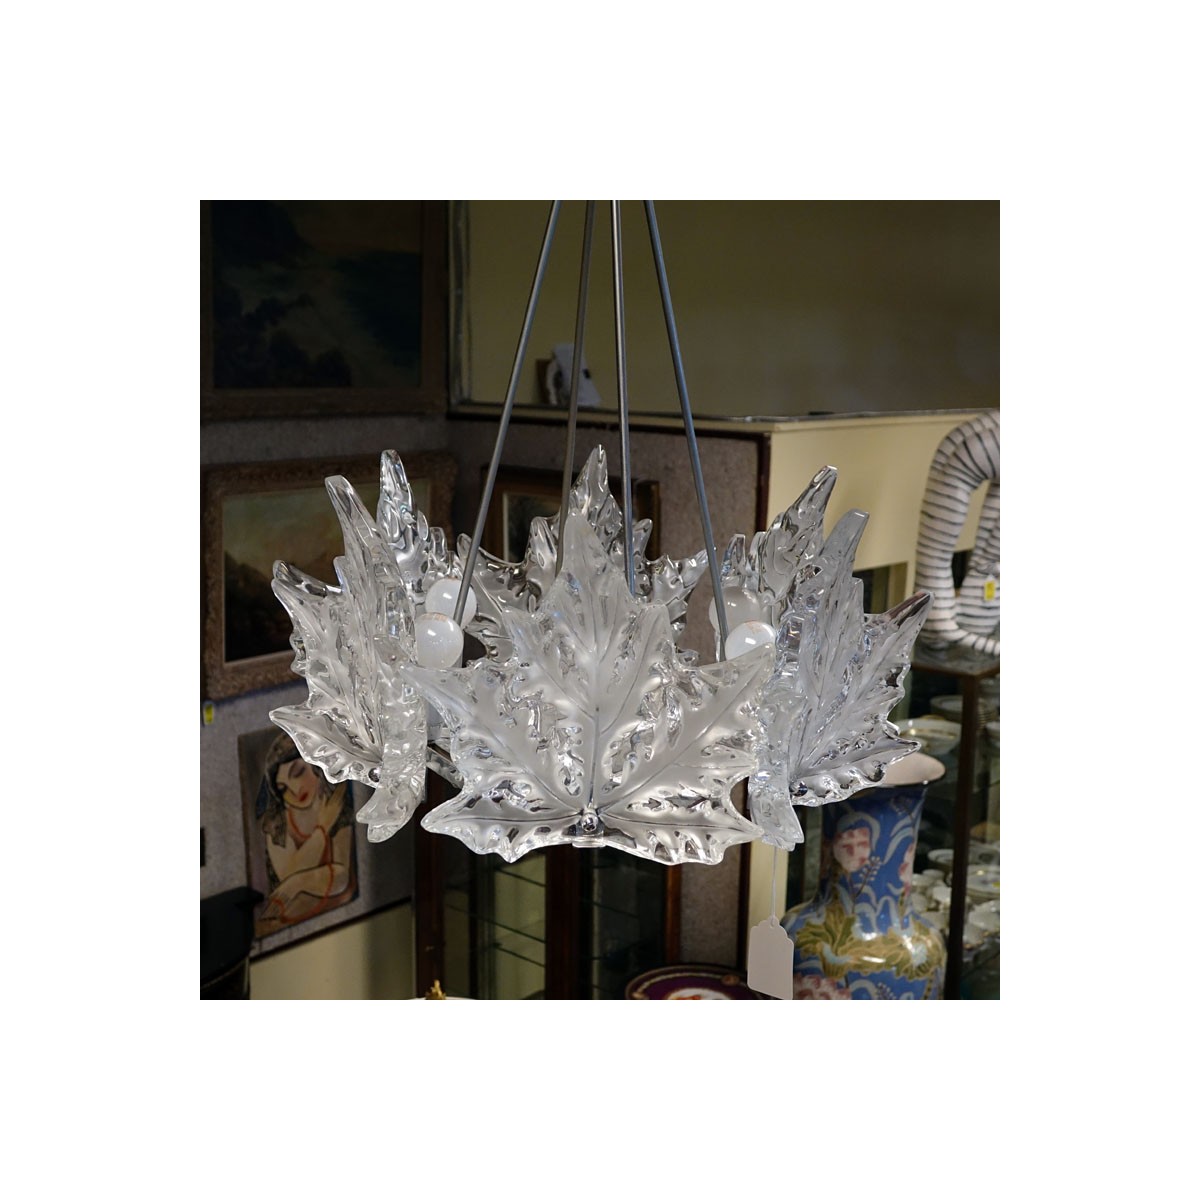 Lalique "Champ Elysees" Crystal Chandelier